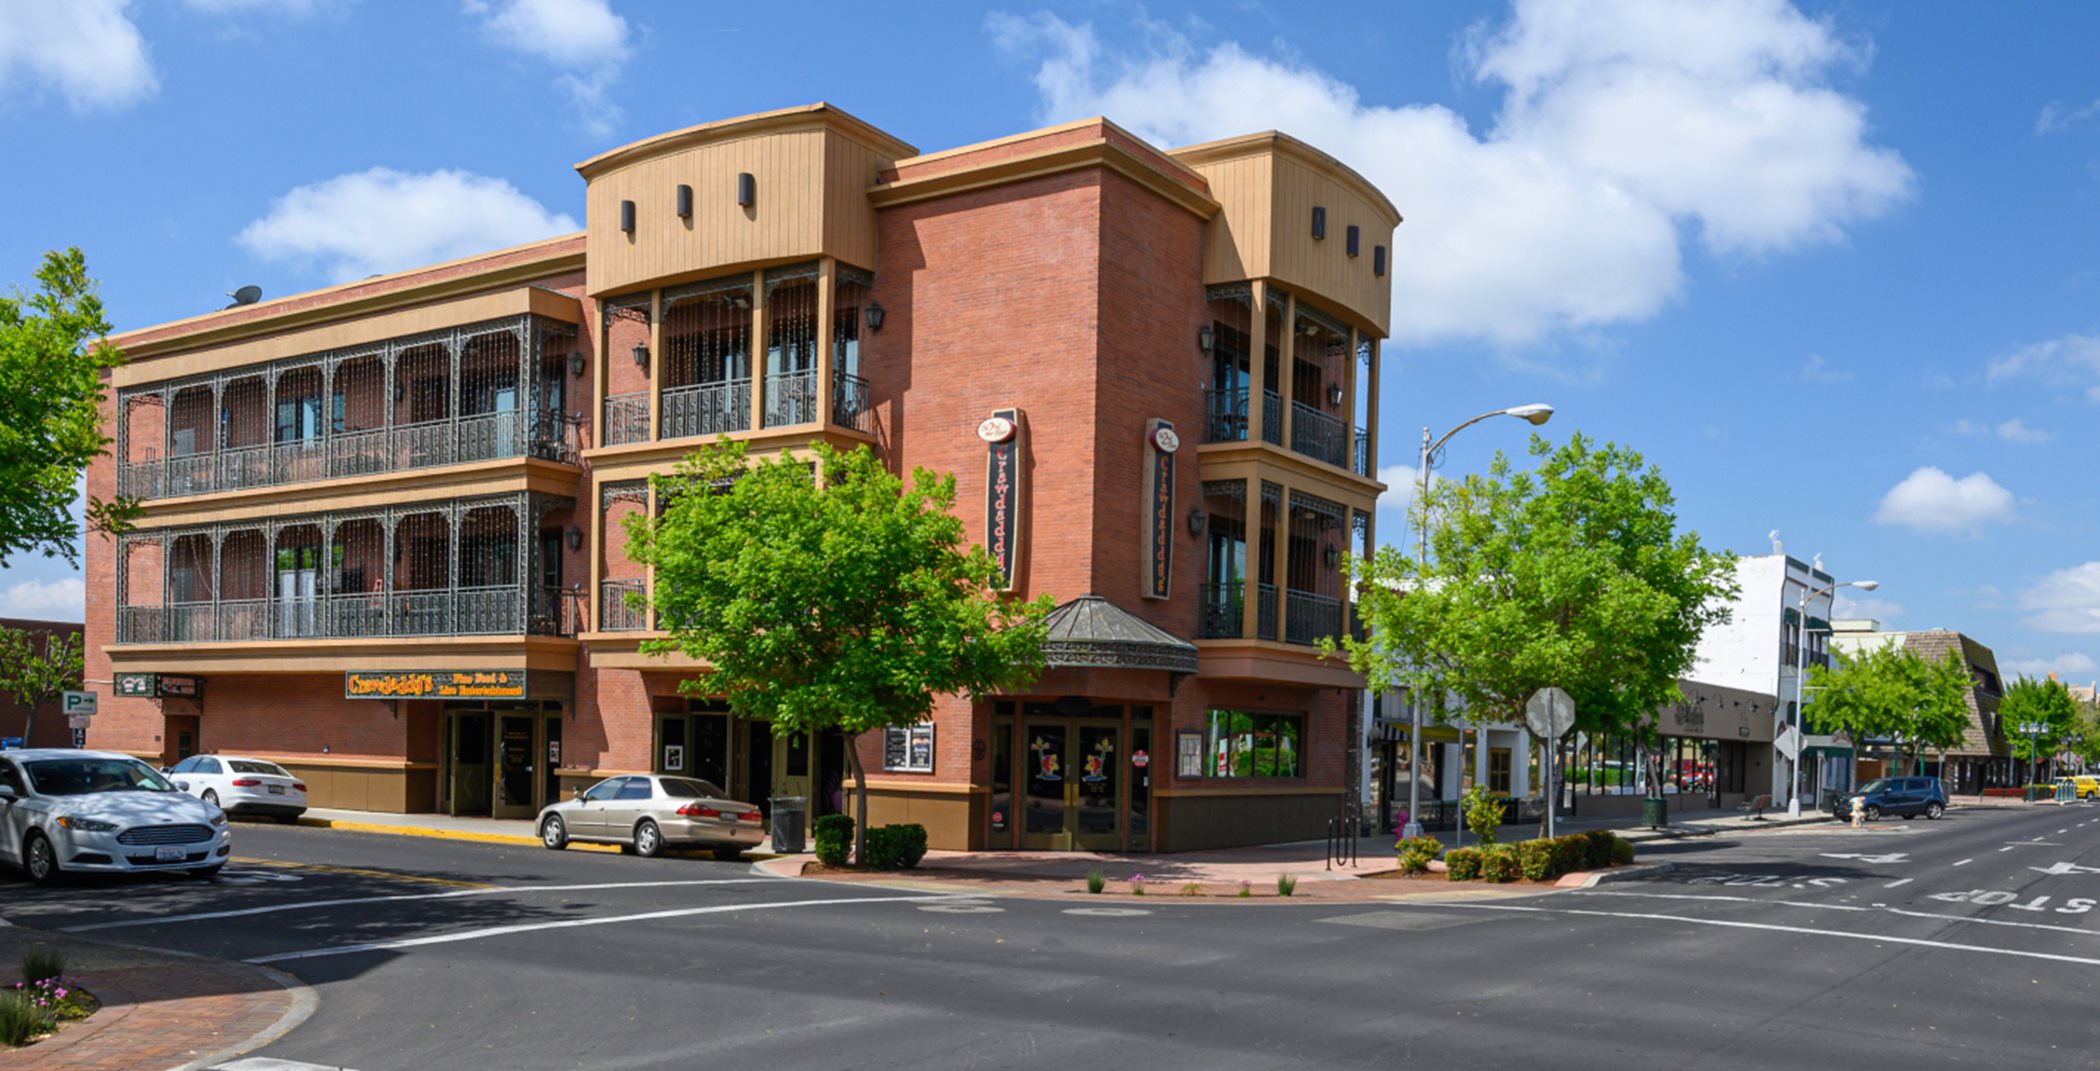 Downtown Visalia buildings and streets